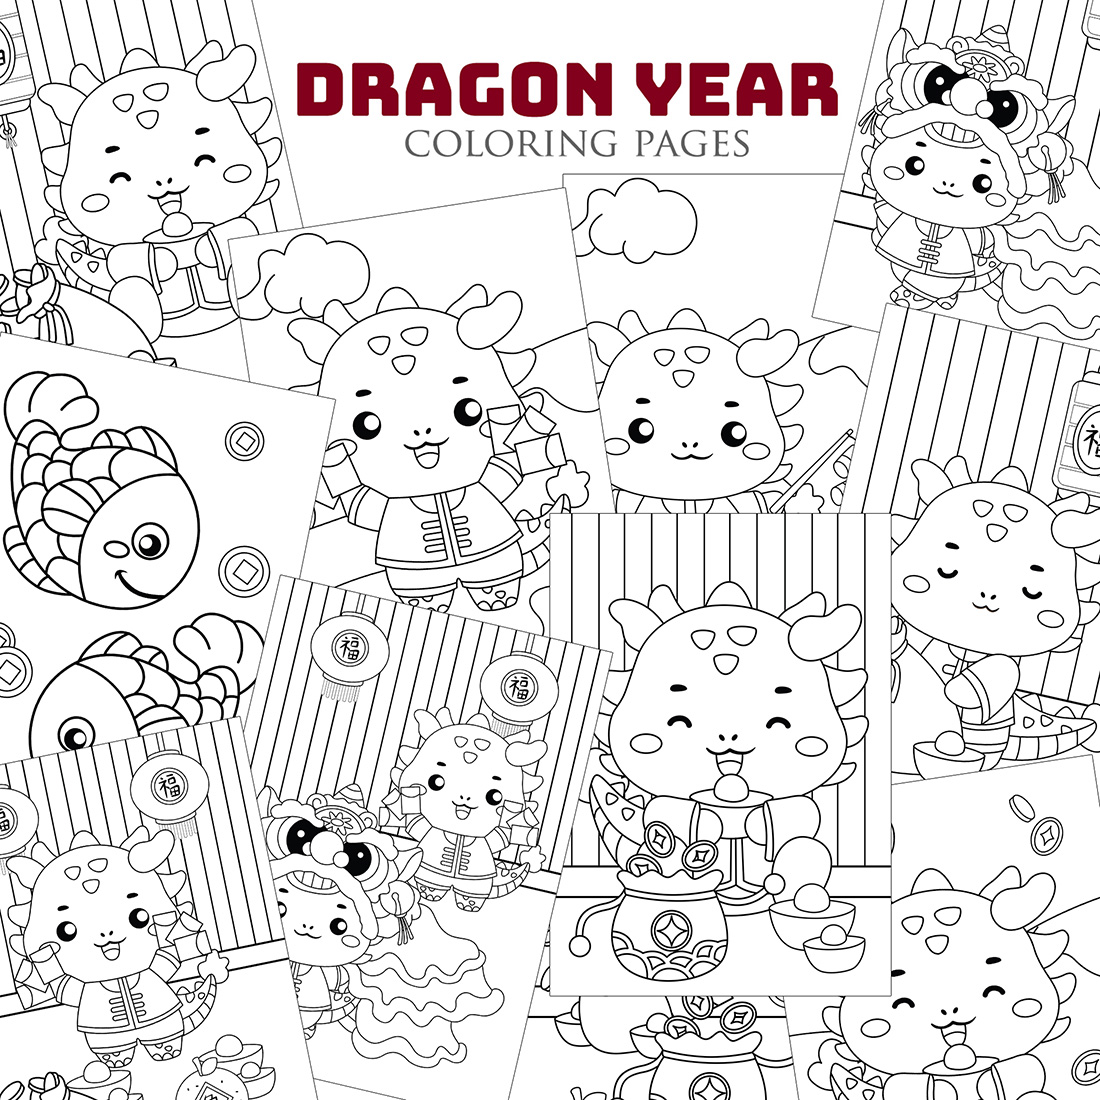 Cute Chinese New Year Lunar Celebration Dragon Year Decoration Background Coloring Holiday Activity for Kids and Adult Cartoon Accessories Ornaments cover image.